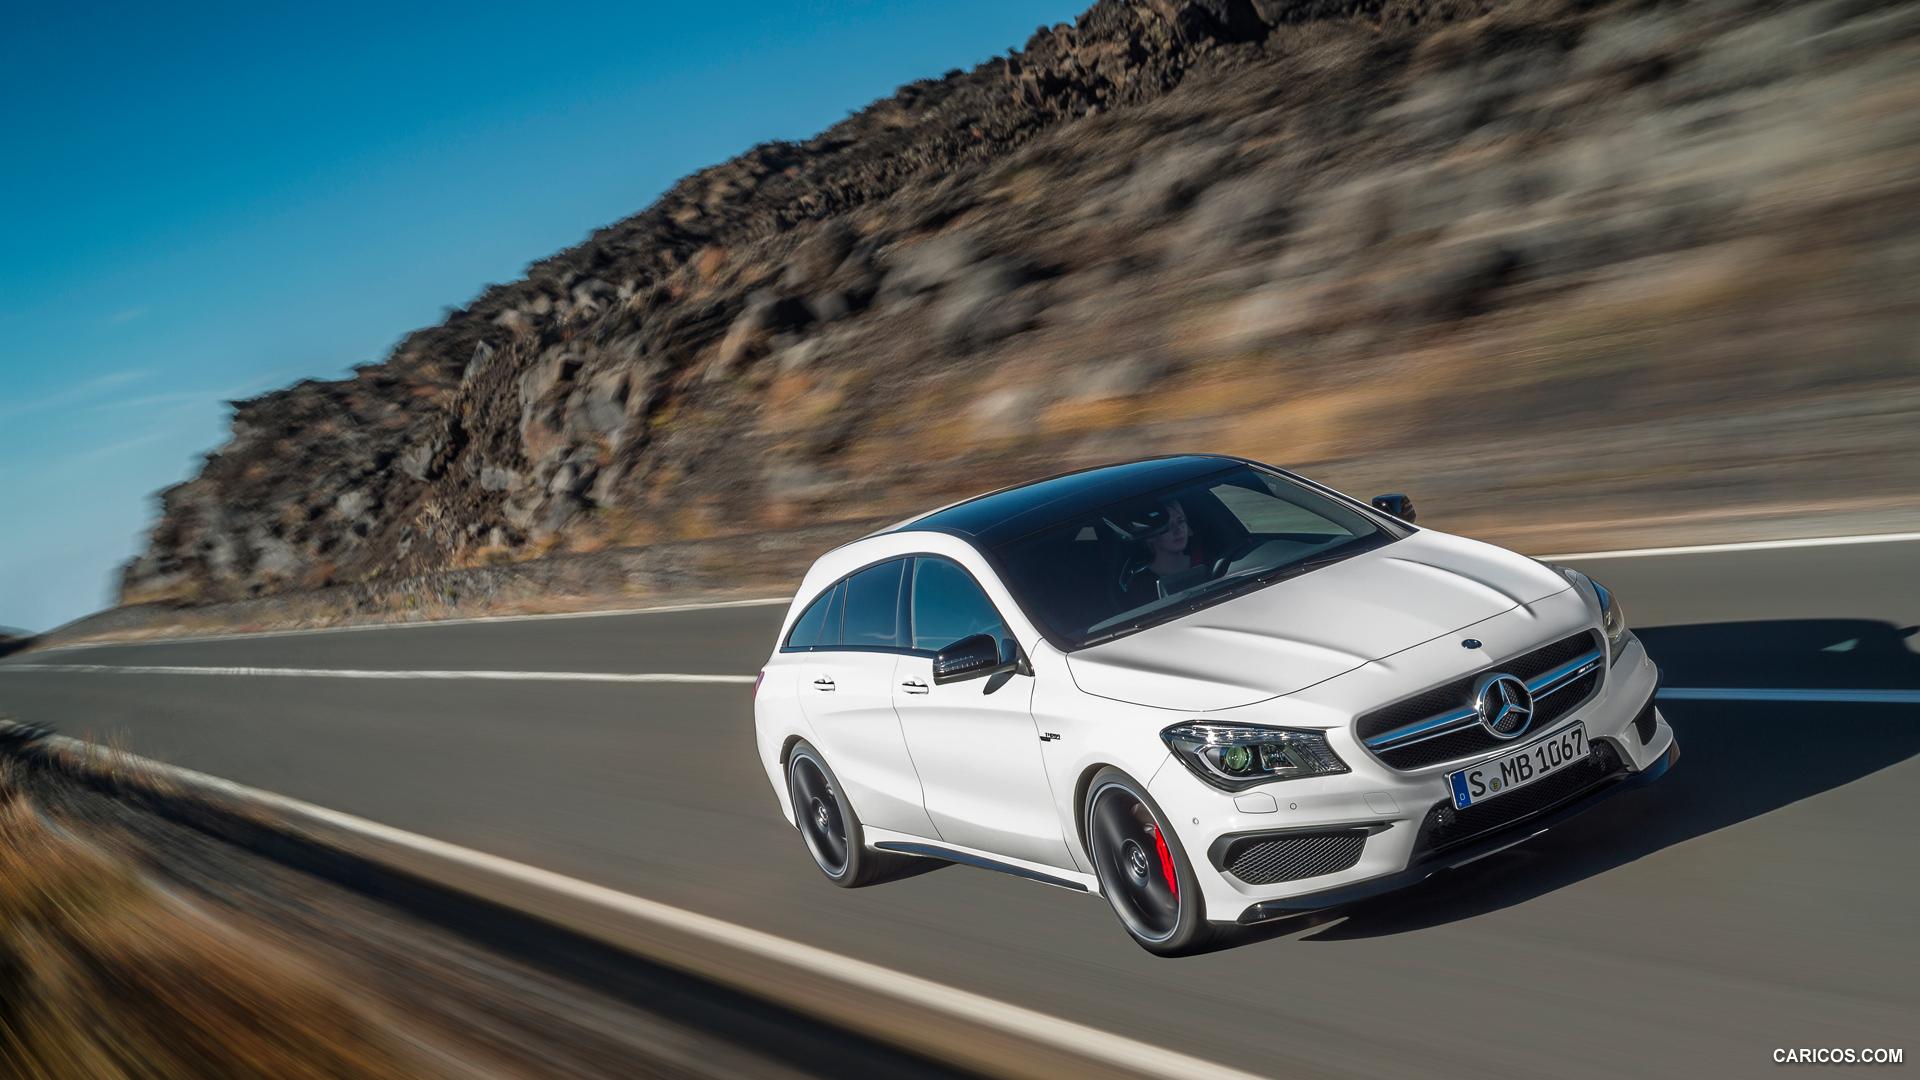 2015 Mercedes-Benz CLA 45 AMG Shooting Brake (Calcite White) - Front, #28 of 70